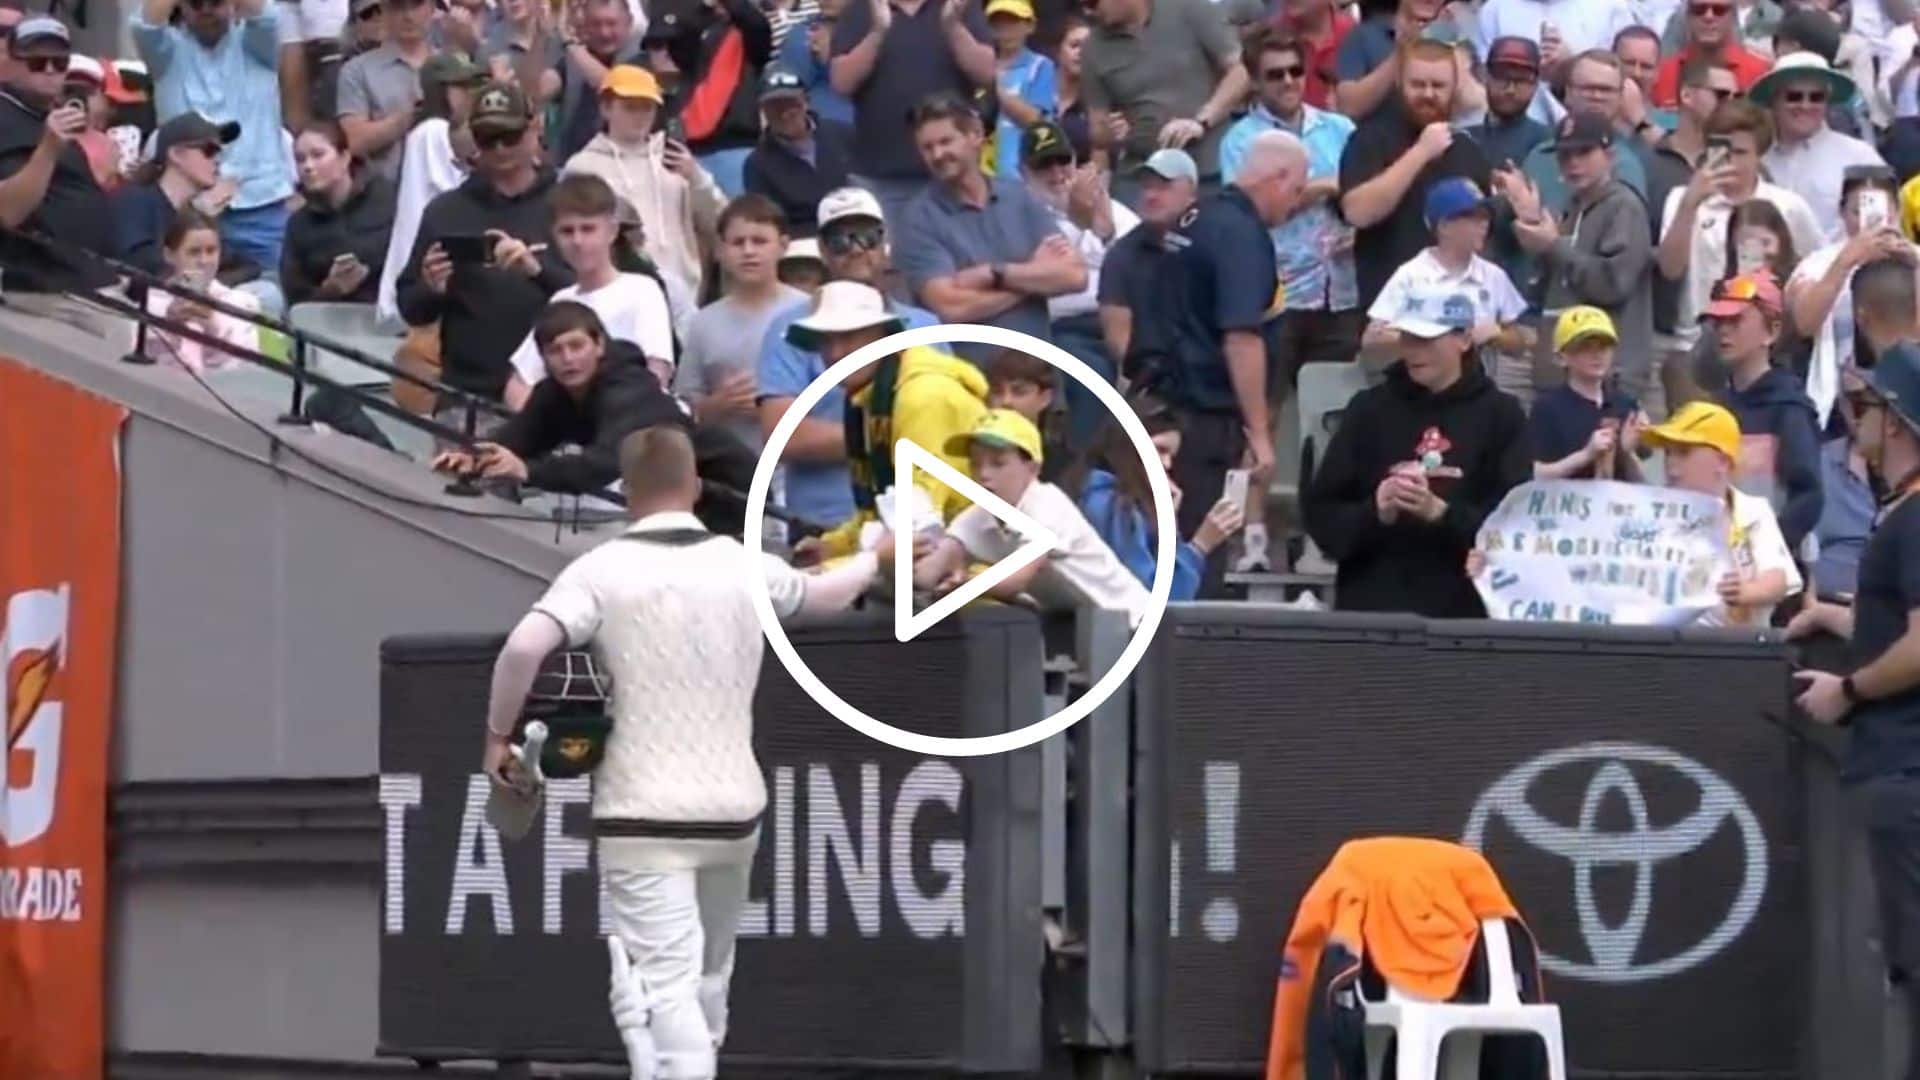 [Watch] David Warner Gifts His Gloves To A Kind During His MCG Farewell Walk 